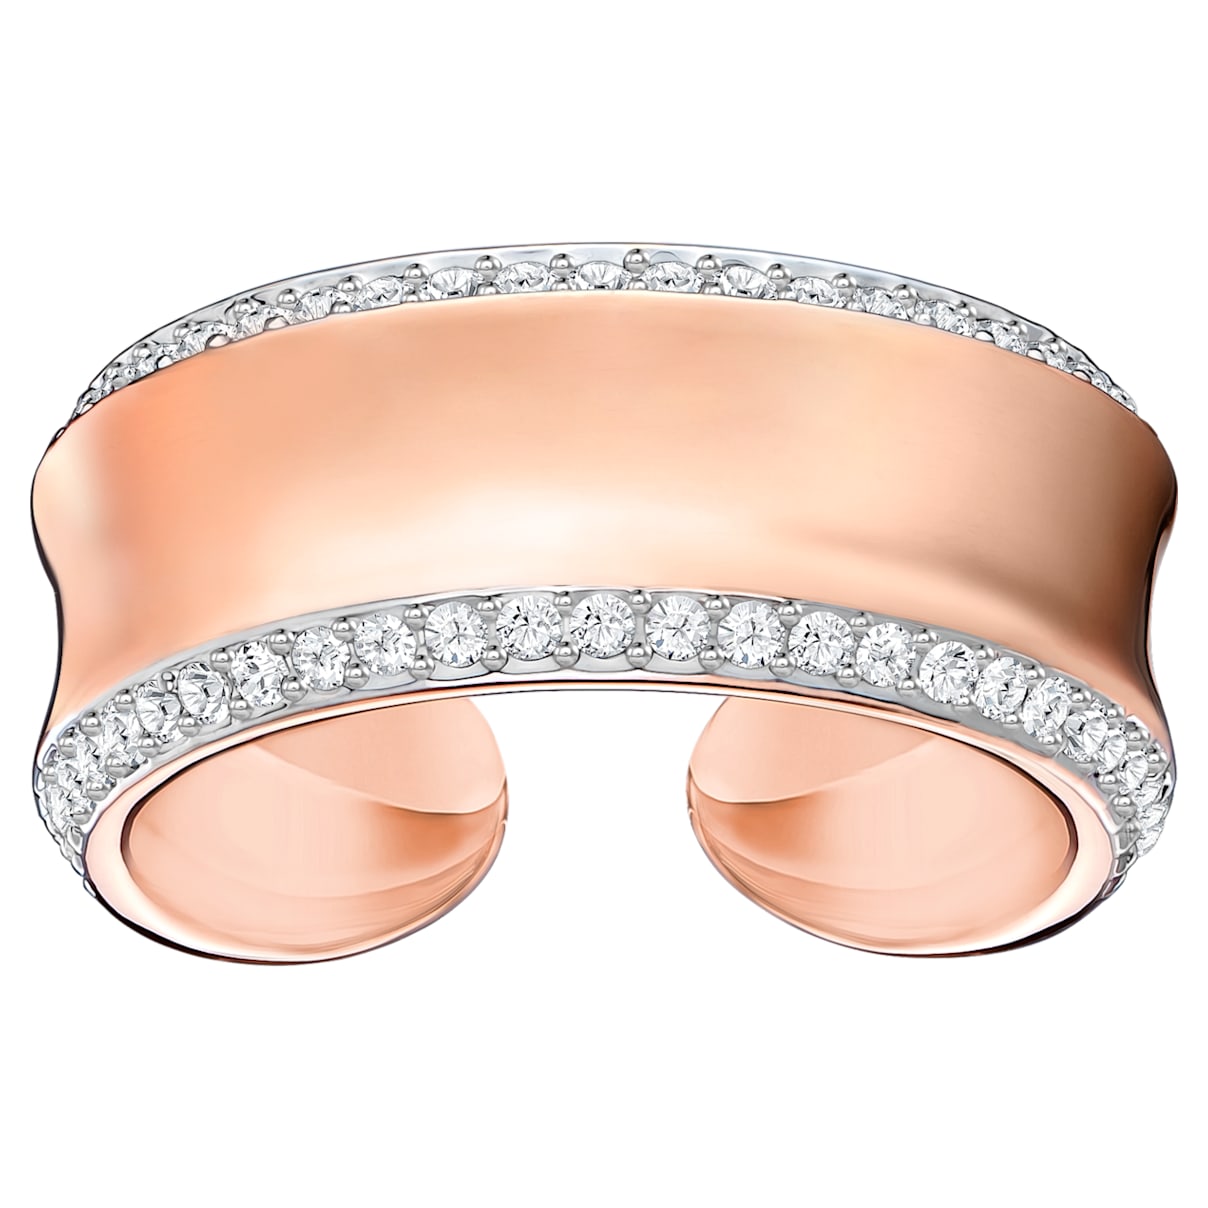 Lakeside Ring White, Rose-gold tone plated